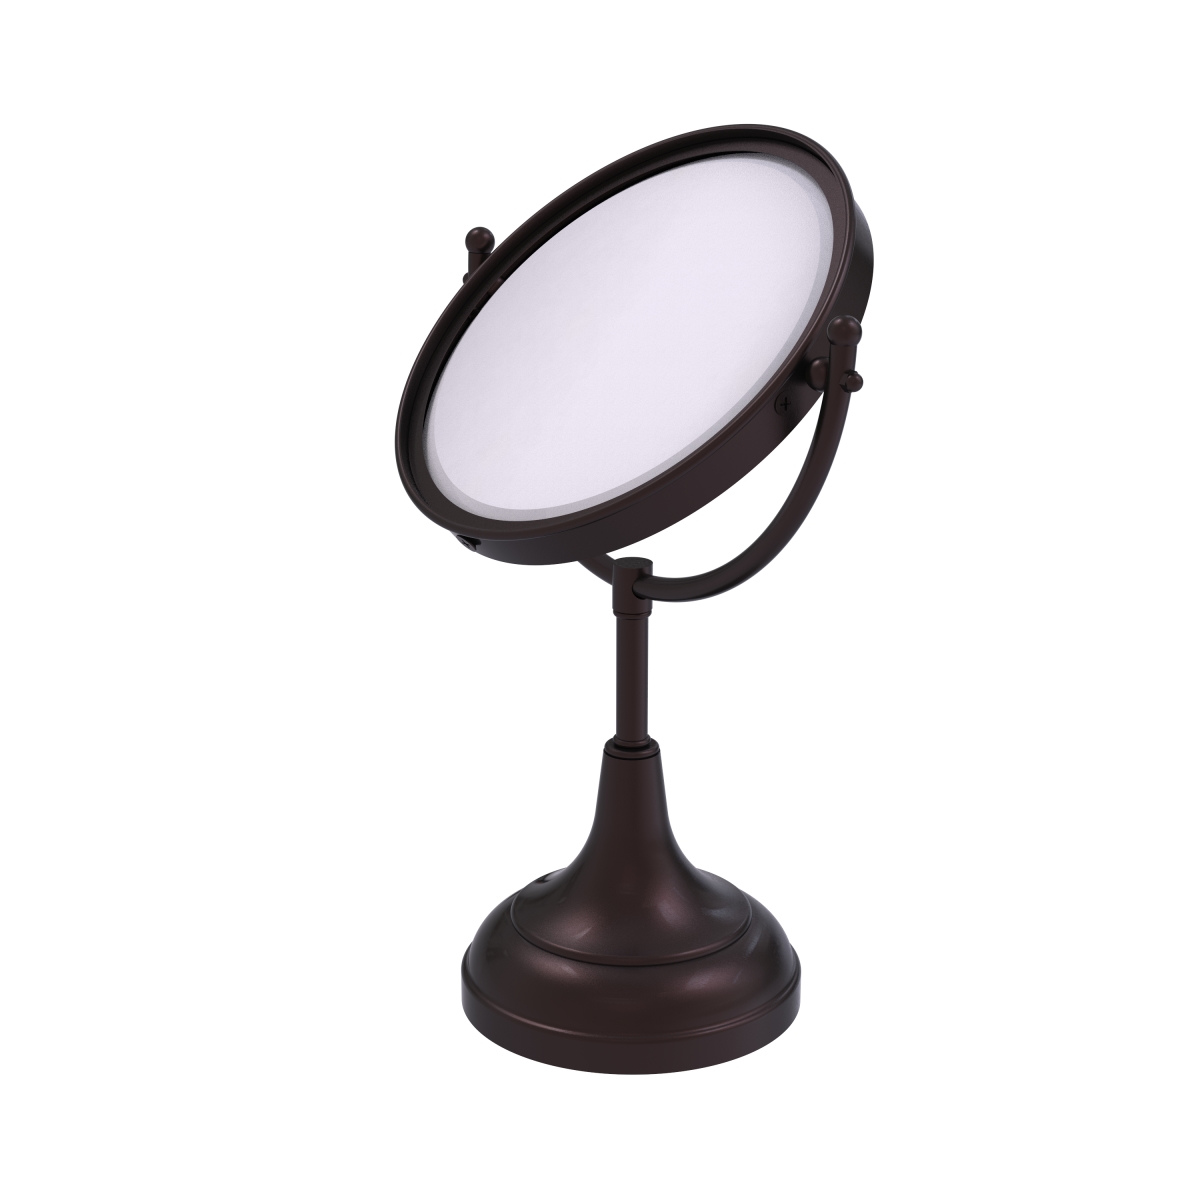 Dm-2-2x-abz Dotted Ring Style 8 In. Vanity Top Make-up Mirror 2x Magnification, Antique Bronze